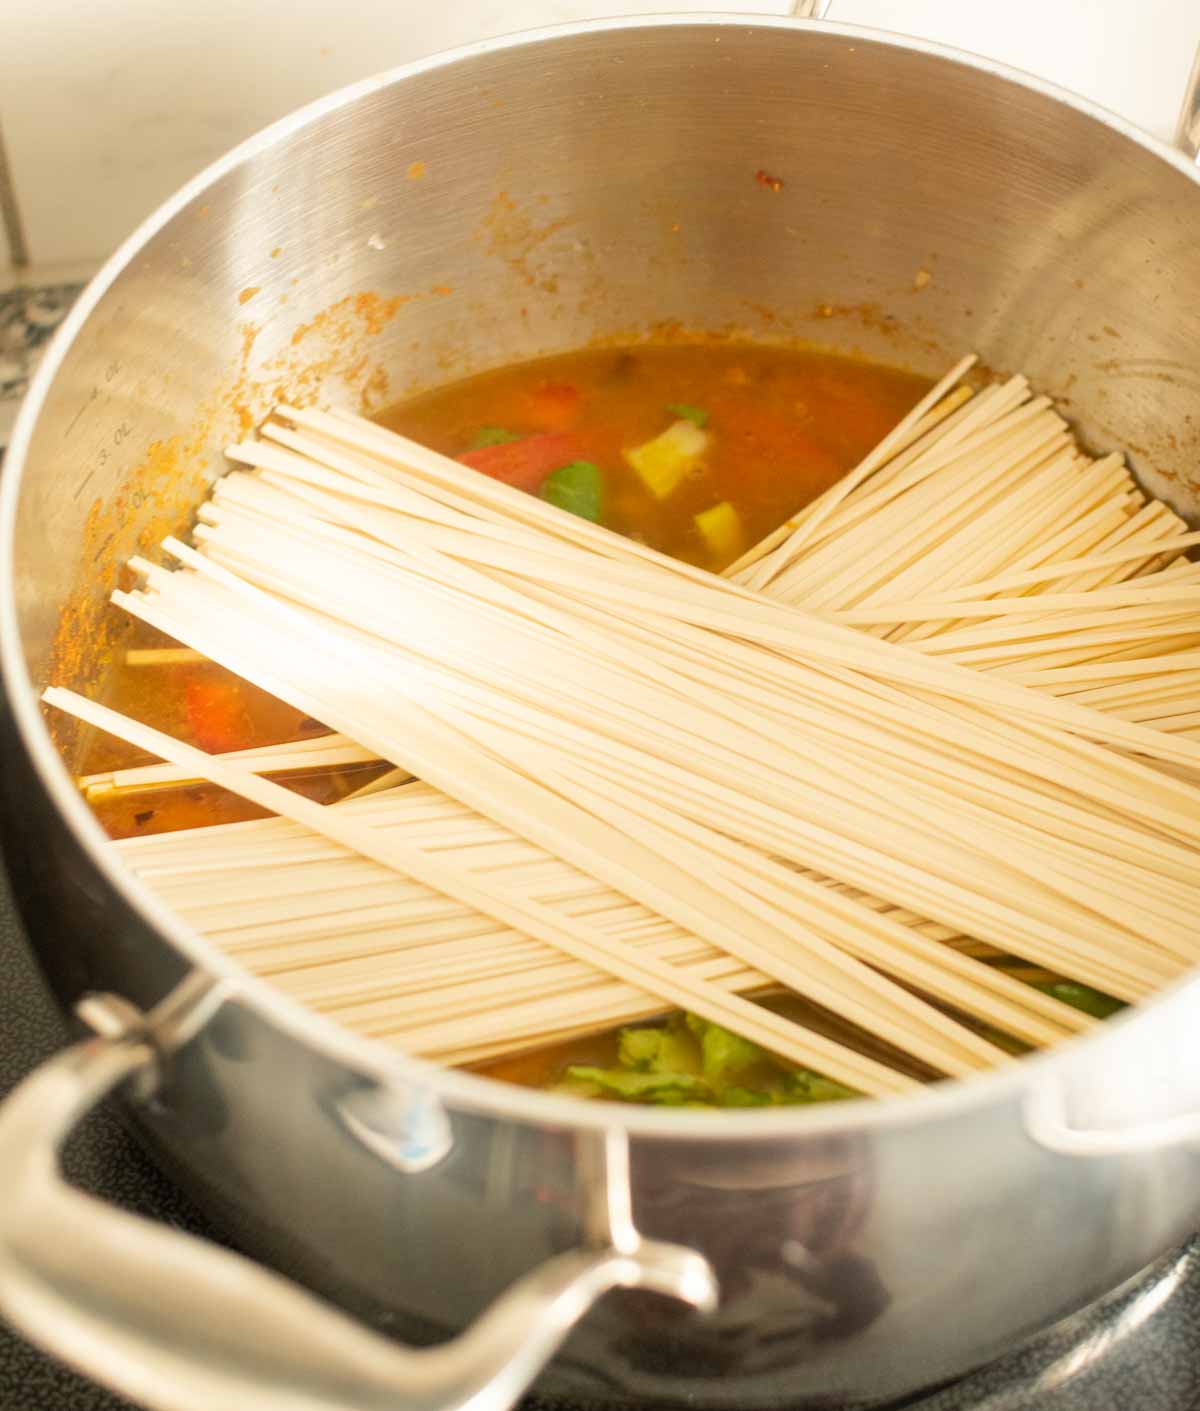 Raw udon noodles placed in a pot of soup on the stovetop